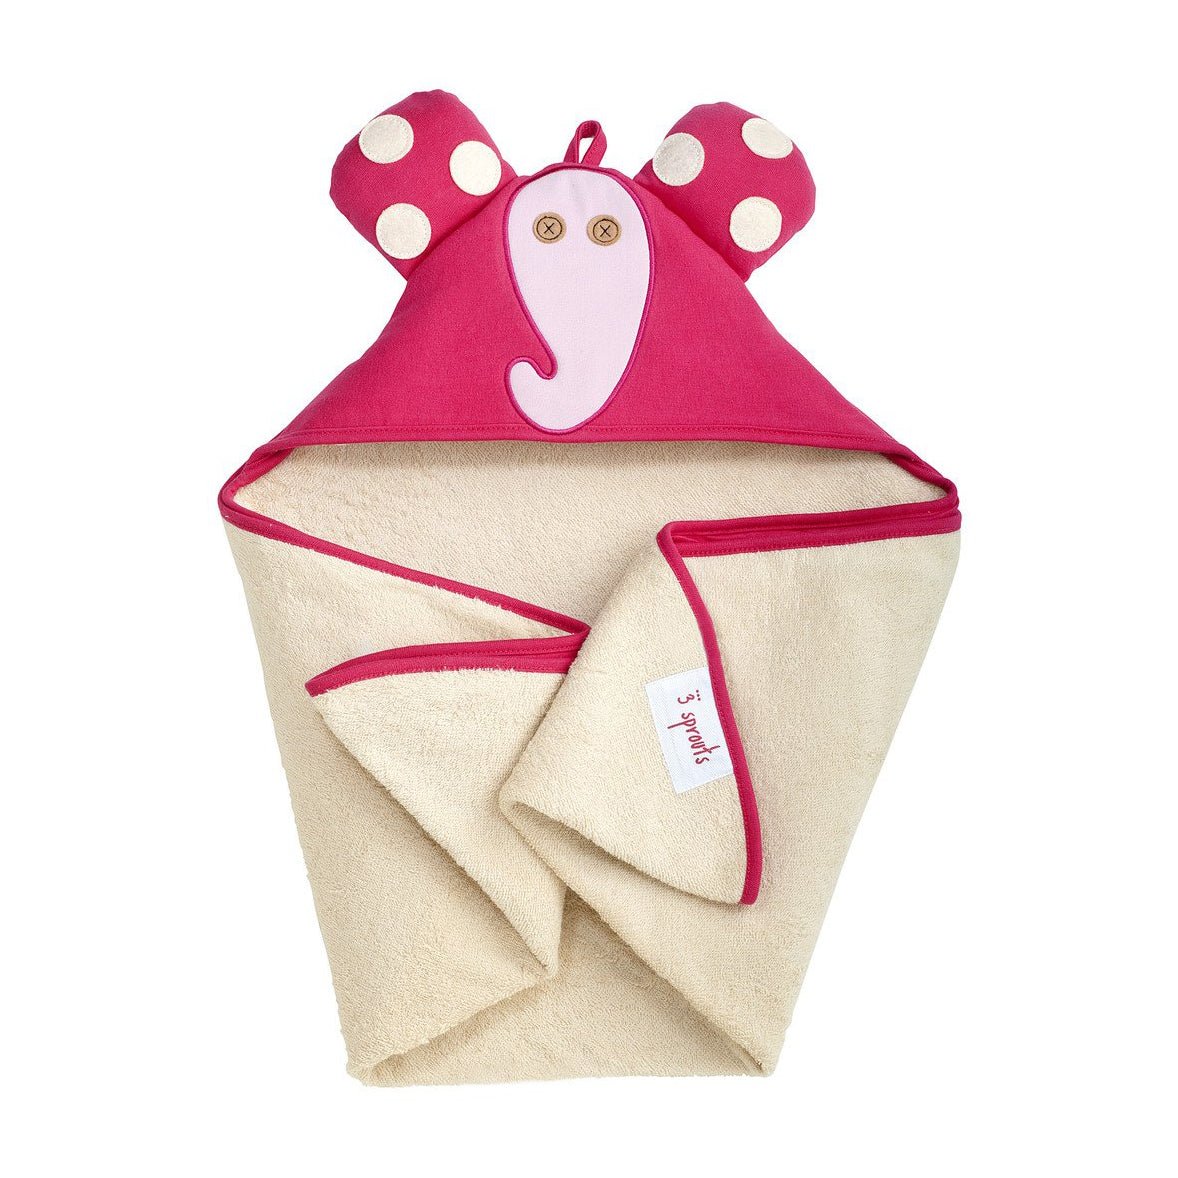 3 SPROUTS HOODED TOWEL - Bloom Pharmacy